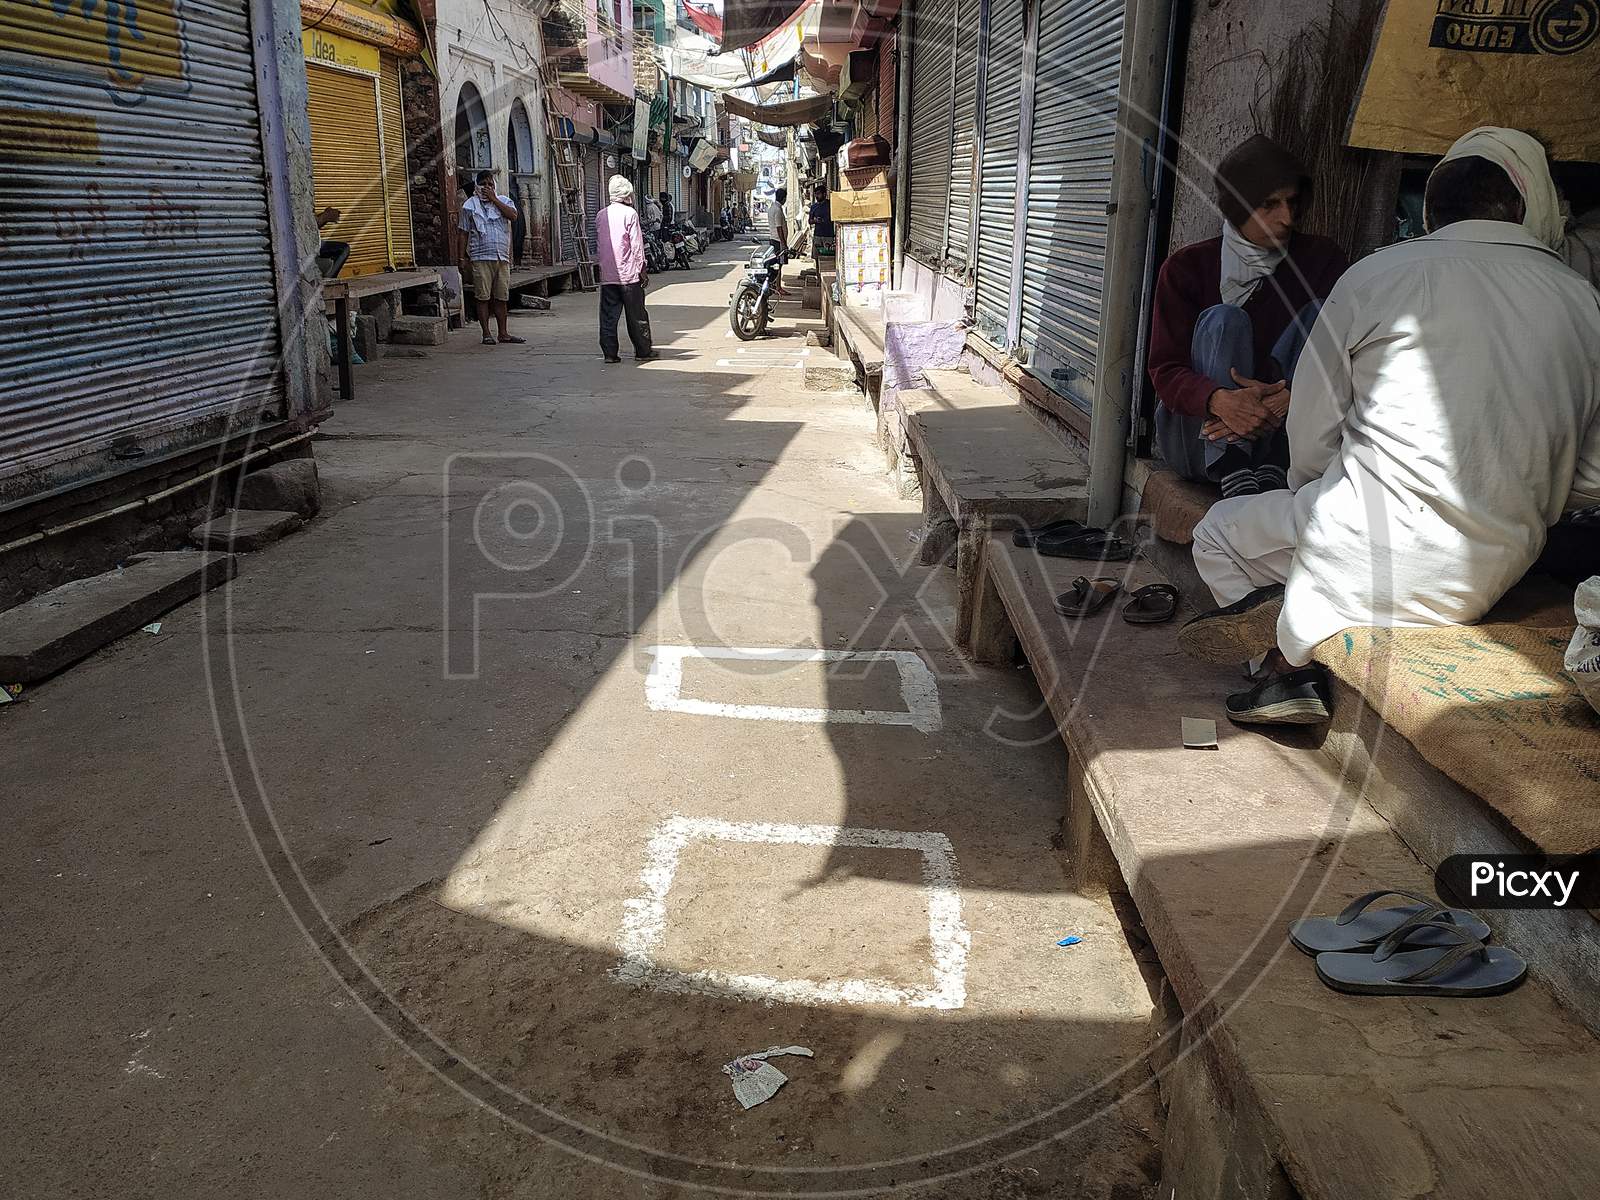 Boxes made on ground outside a shop to ensure social distancing while shopping amid corona virus covid 19 outbreak in India